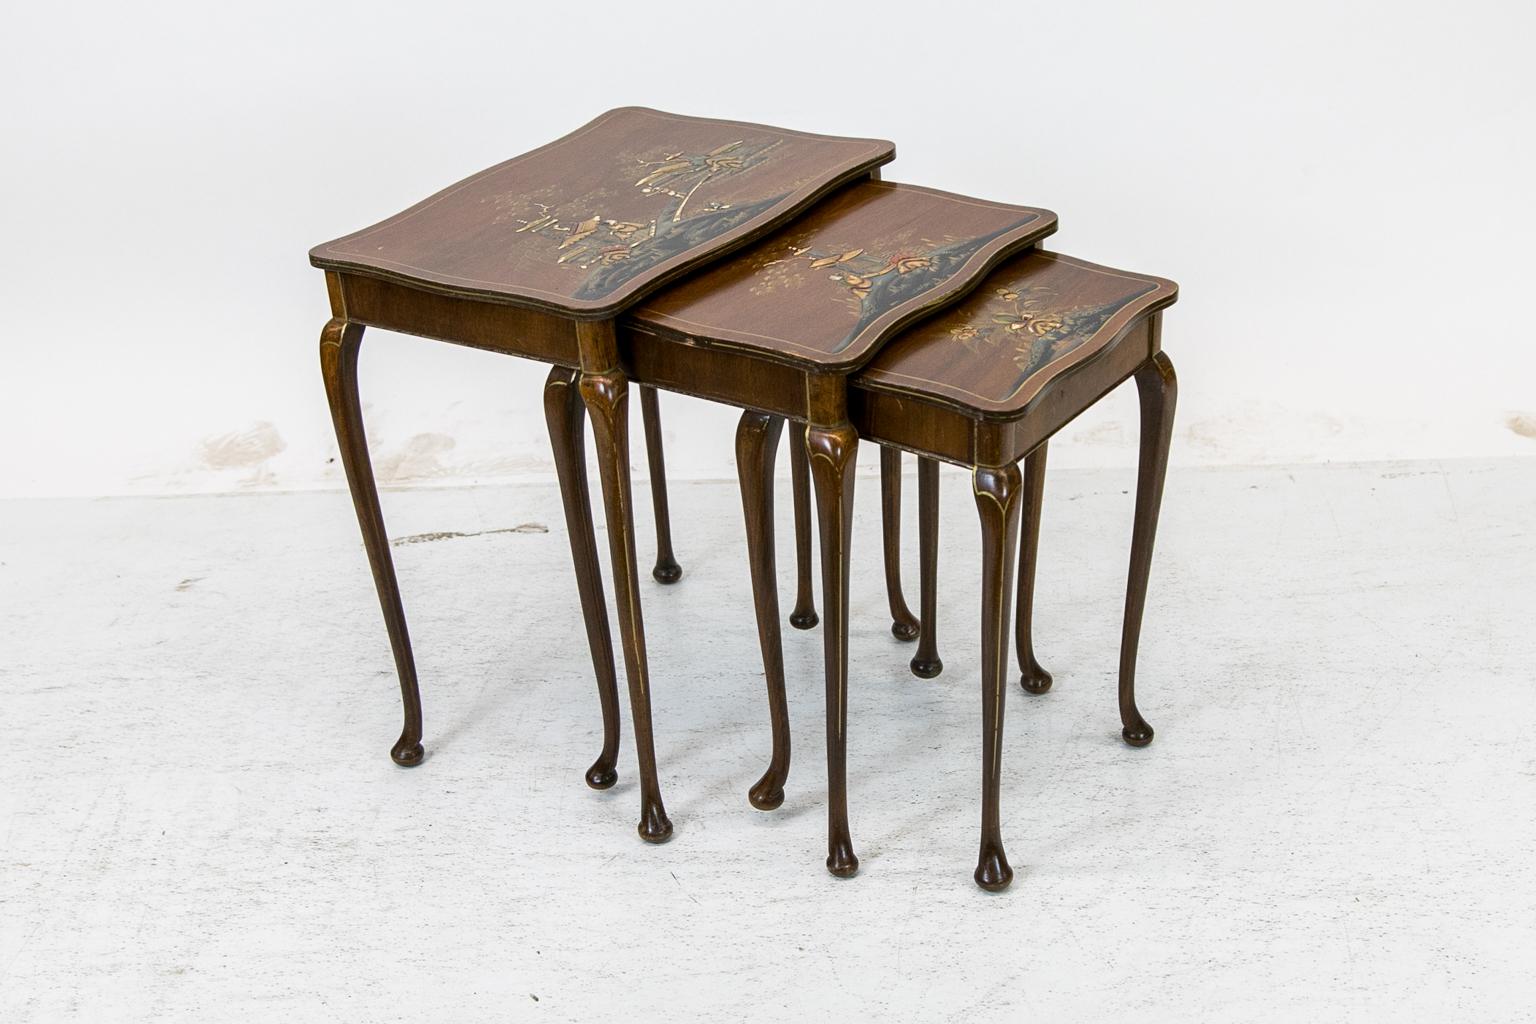 This nest of chinoiserie tables has raised lacquer chinoiserie figures in landscapes and floral decorations. All four sides are serpentine shaped. The legs are cabriole and terminate in pad feet.